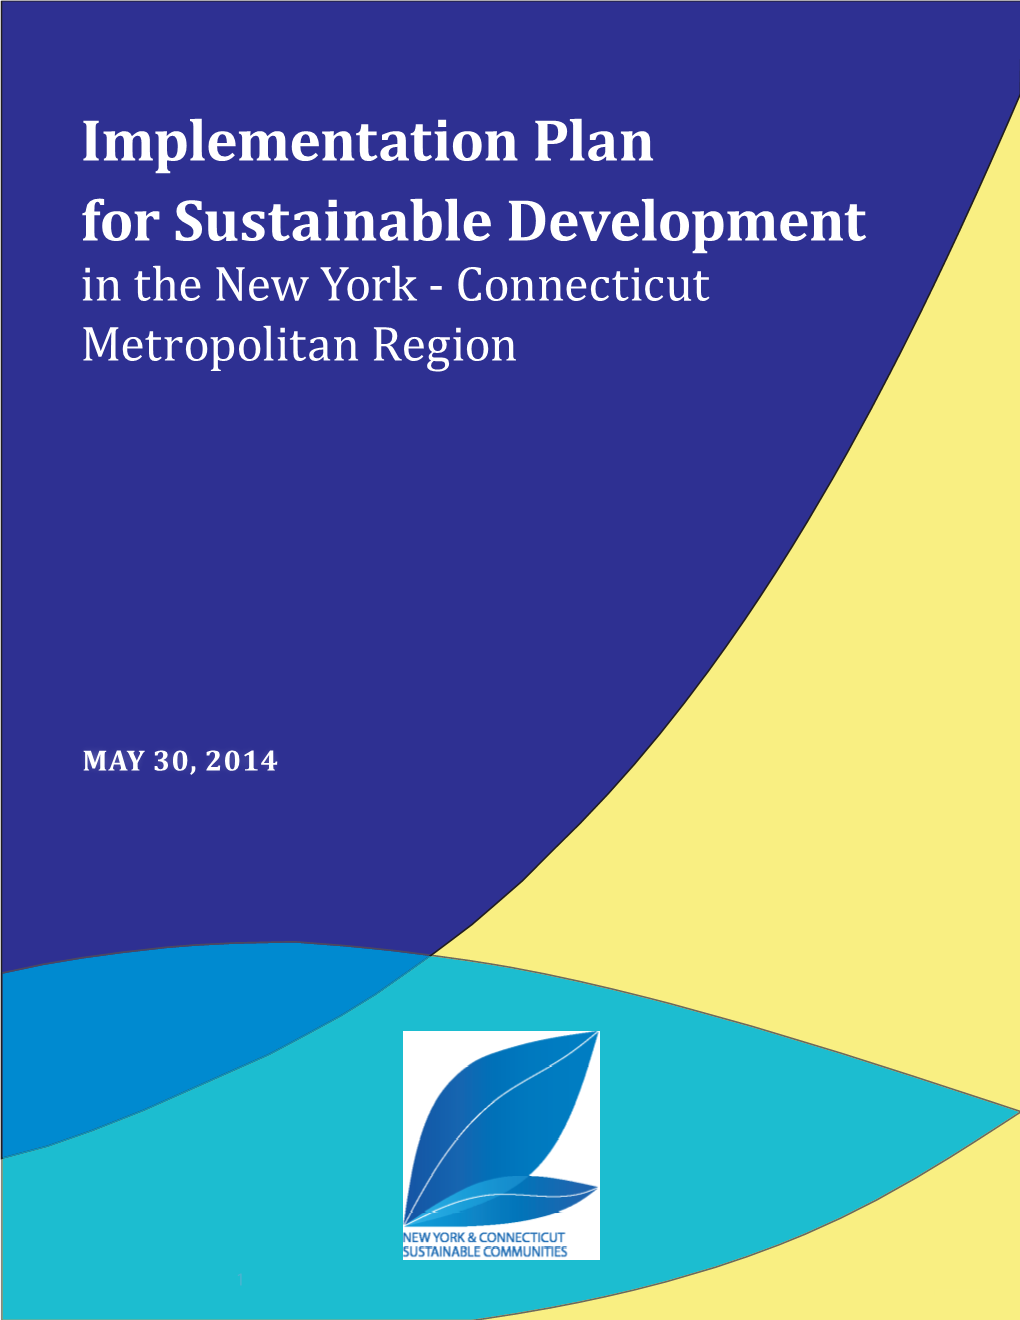 Implementation Plan for Sustainable Development in the New York - Connecticut Metropolitan Region